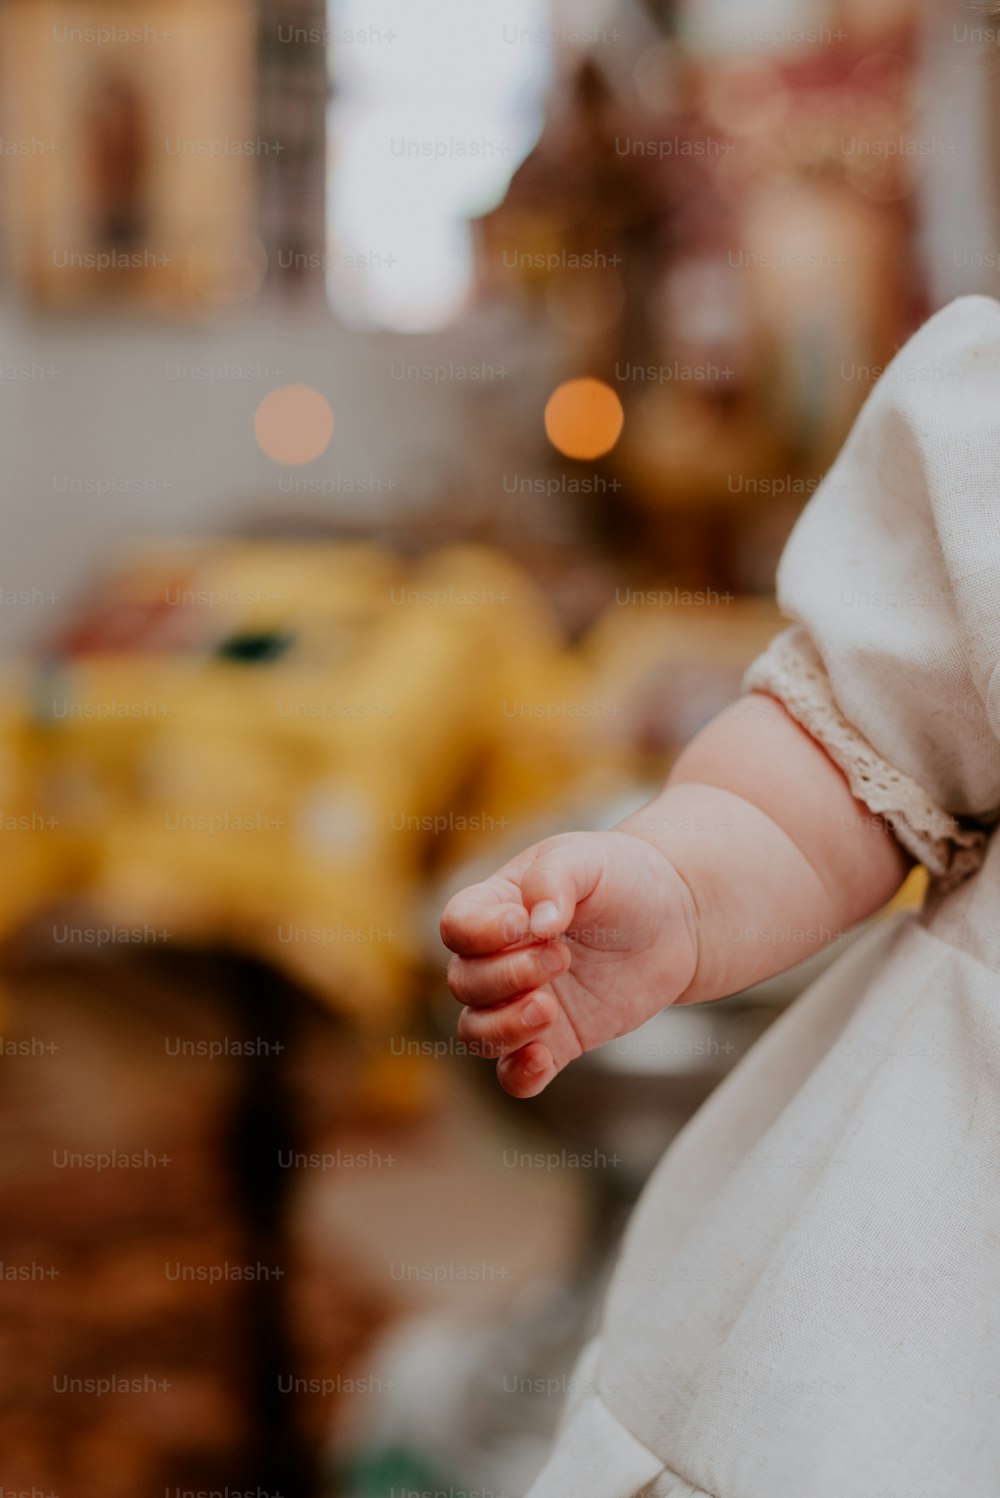 a close up of a baby's hand with a blurry background